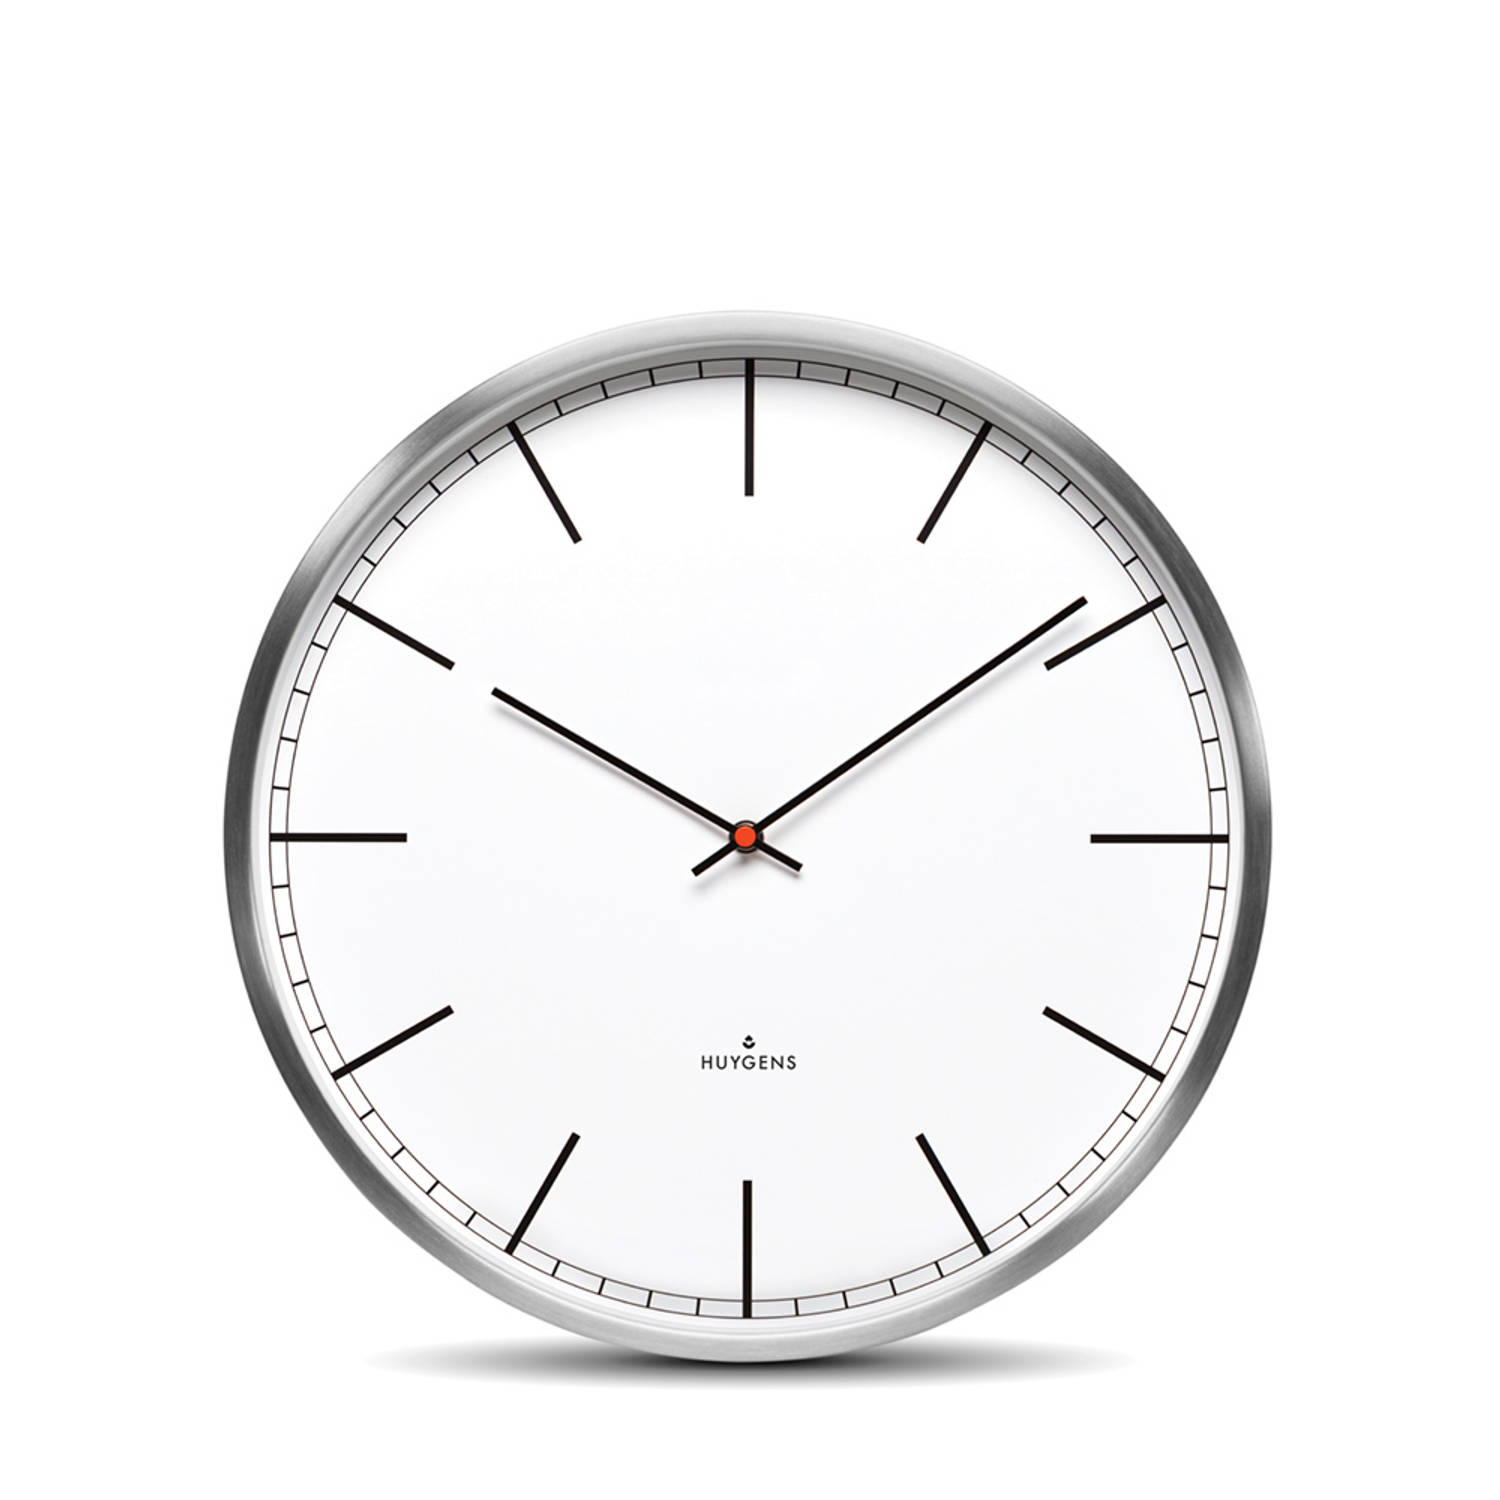 Huygens wall clock one25 stainless steel white index